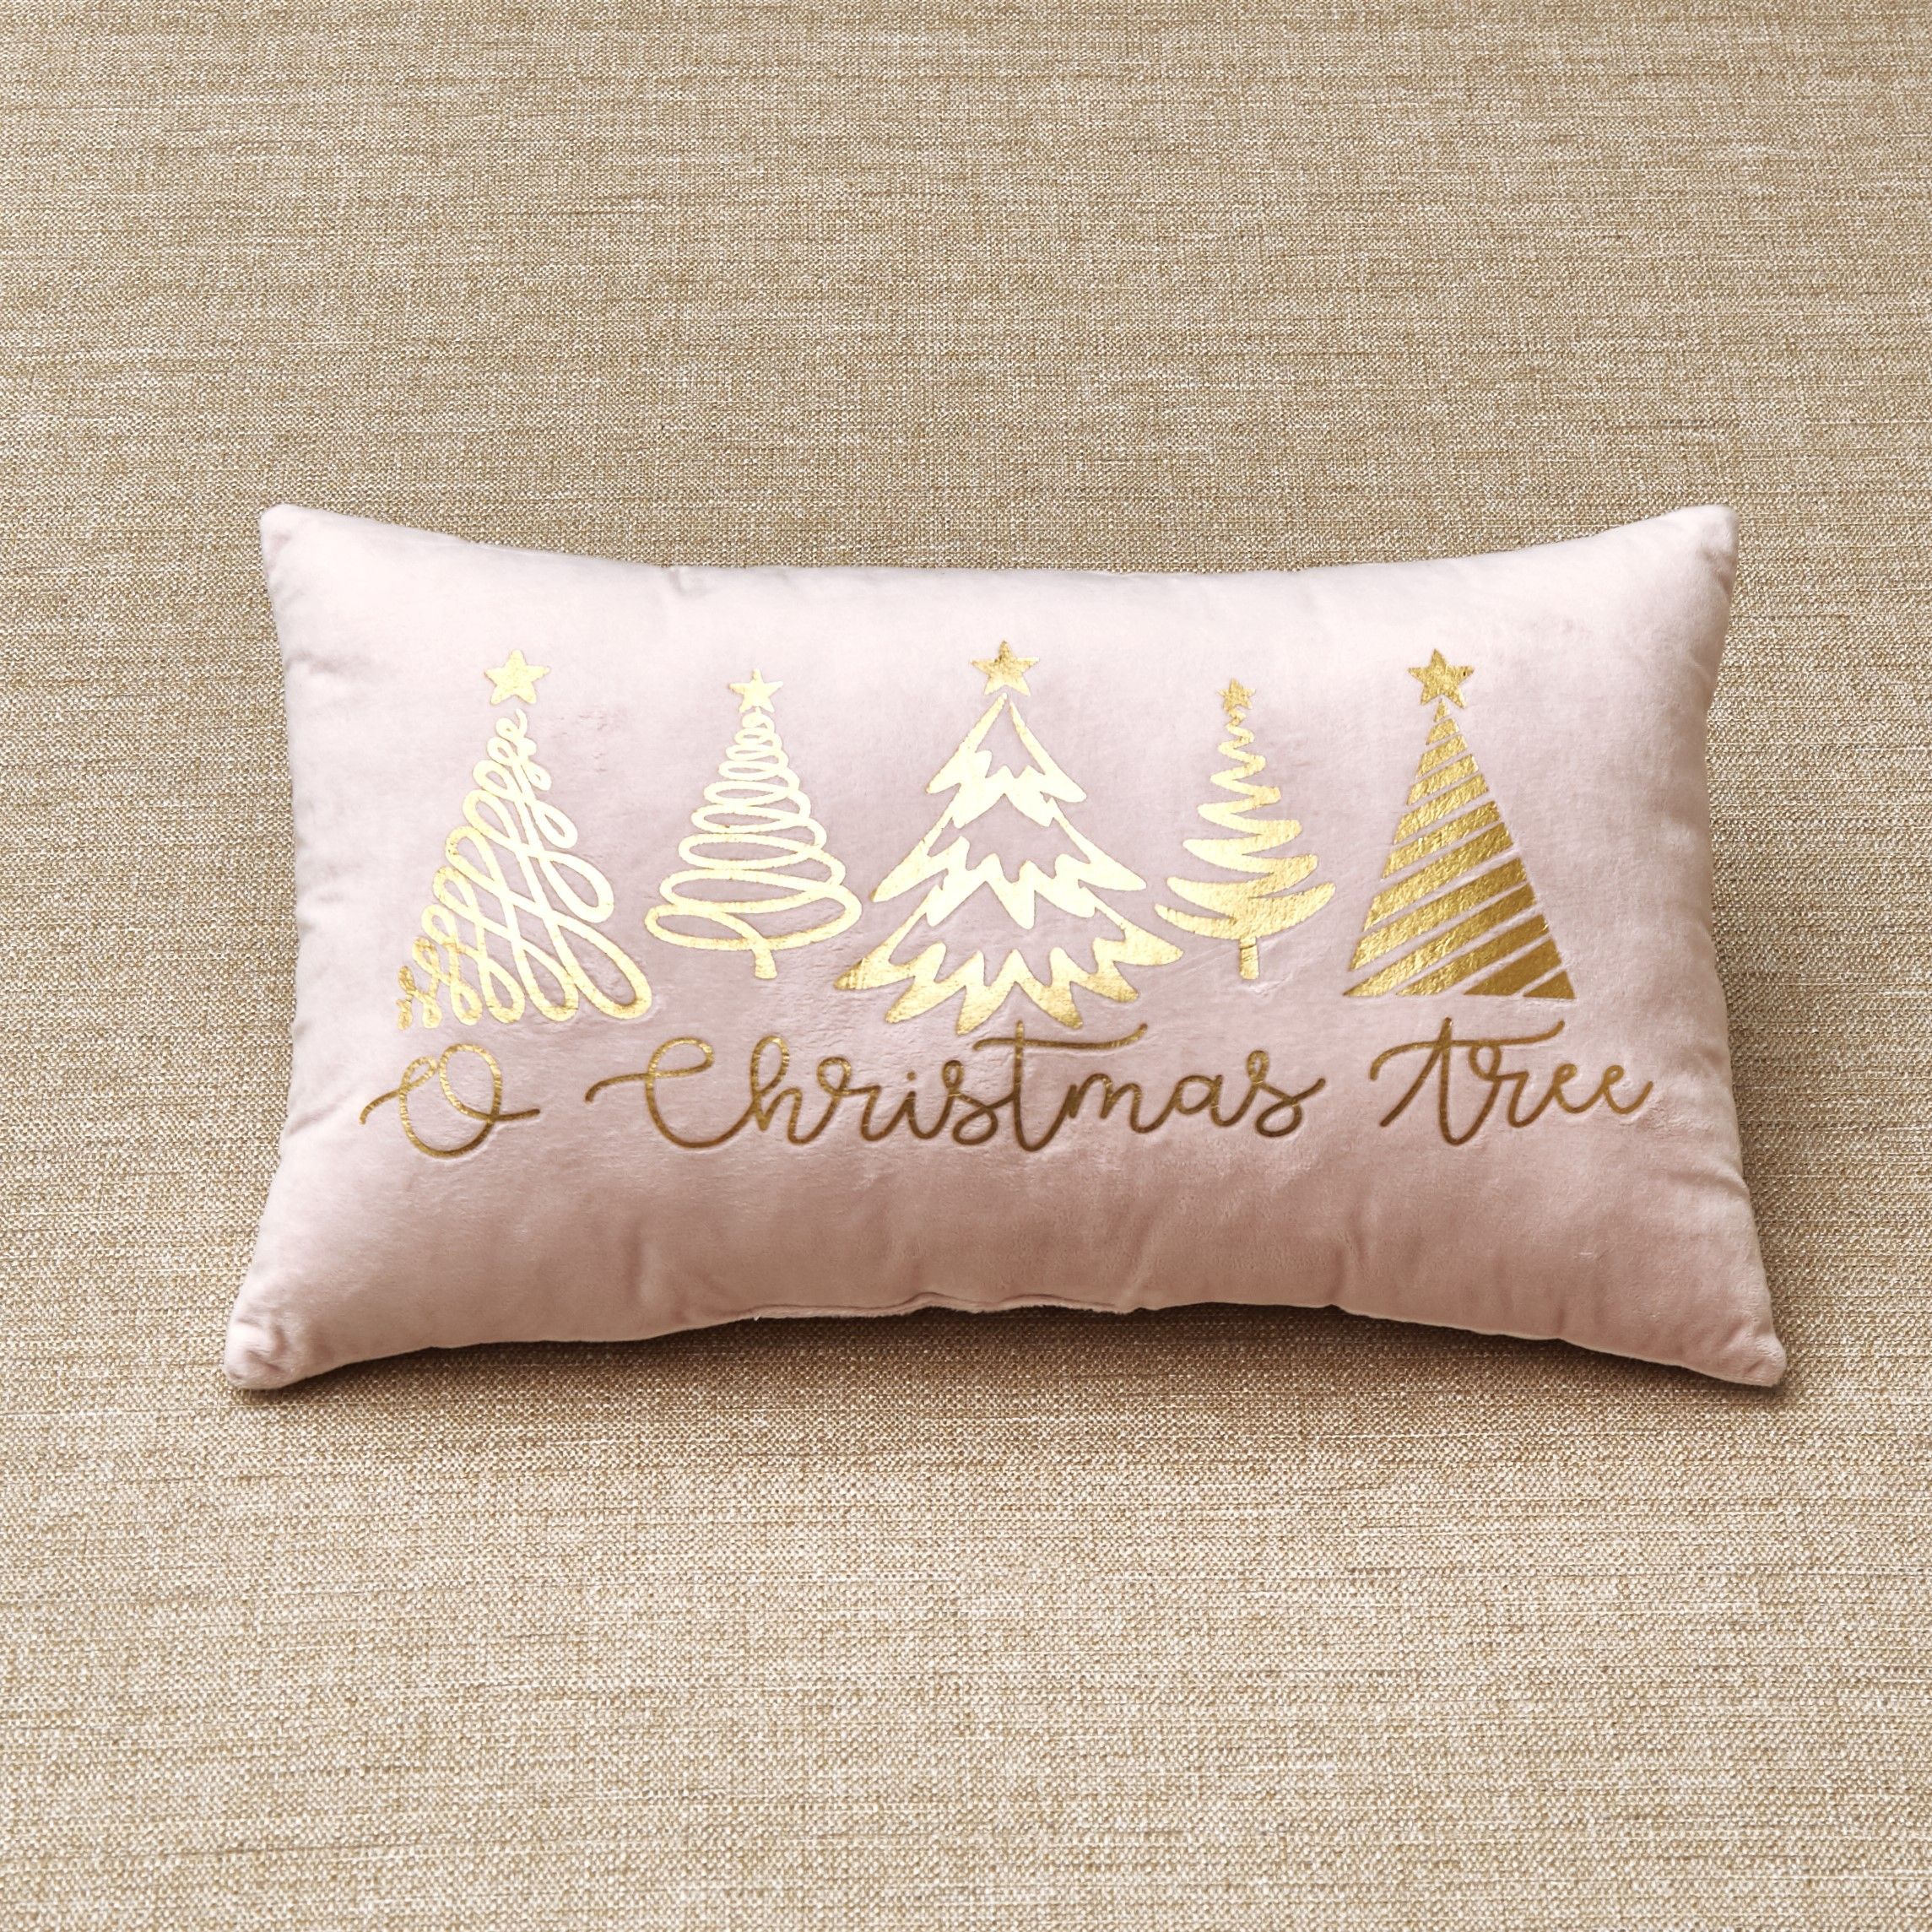 O Christmas Tree Decorative Accent Lumbar Pillow with Holiday Motif -   19 christmas decor for bedroom pink ideas